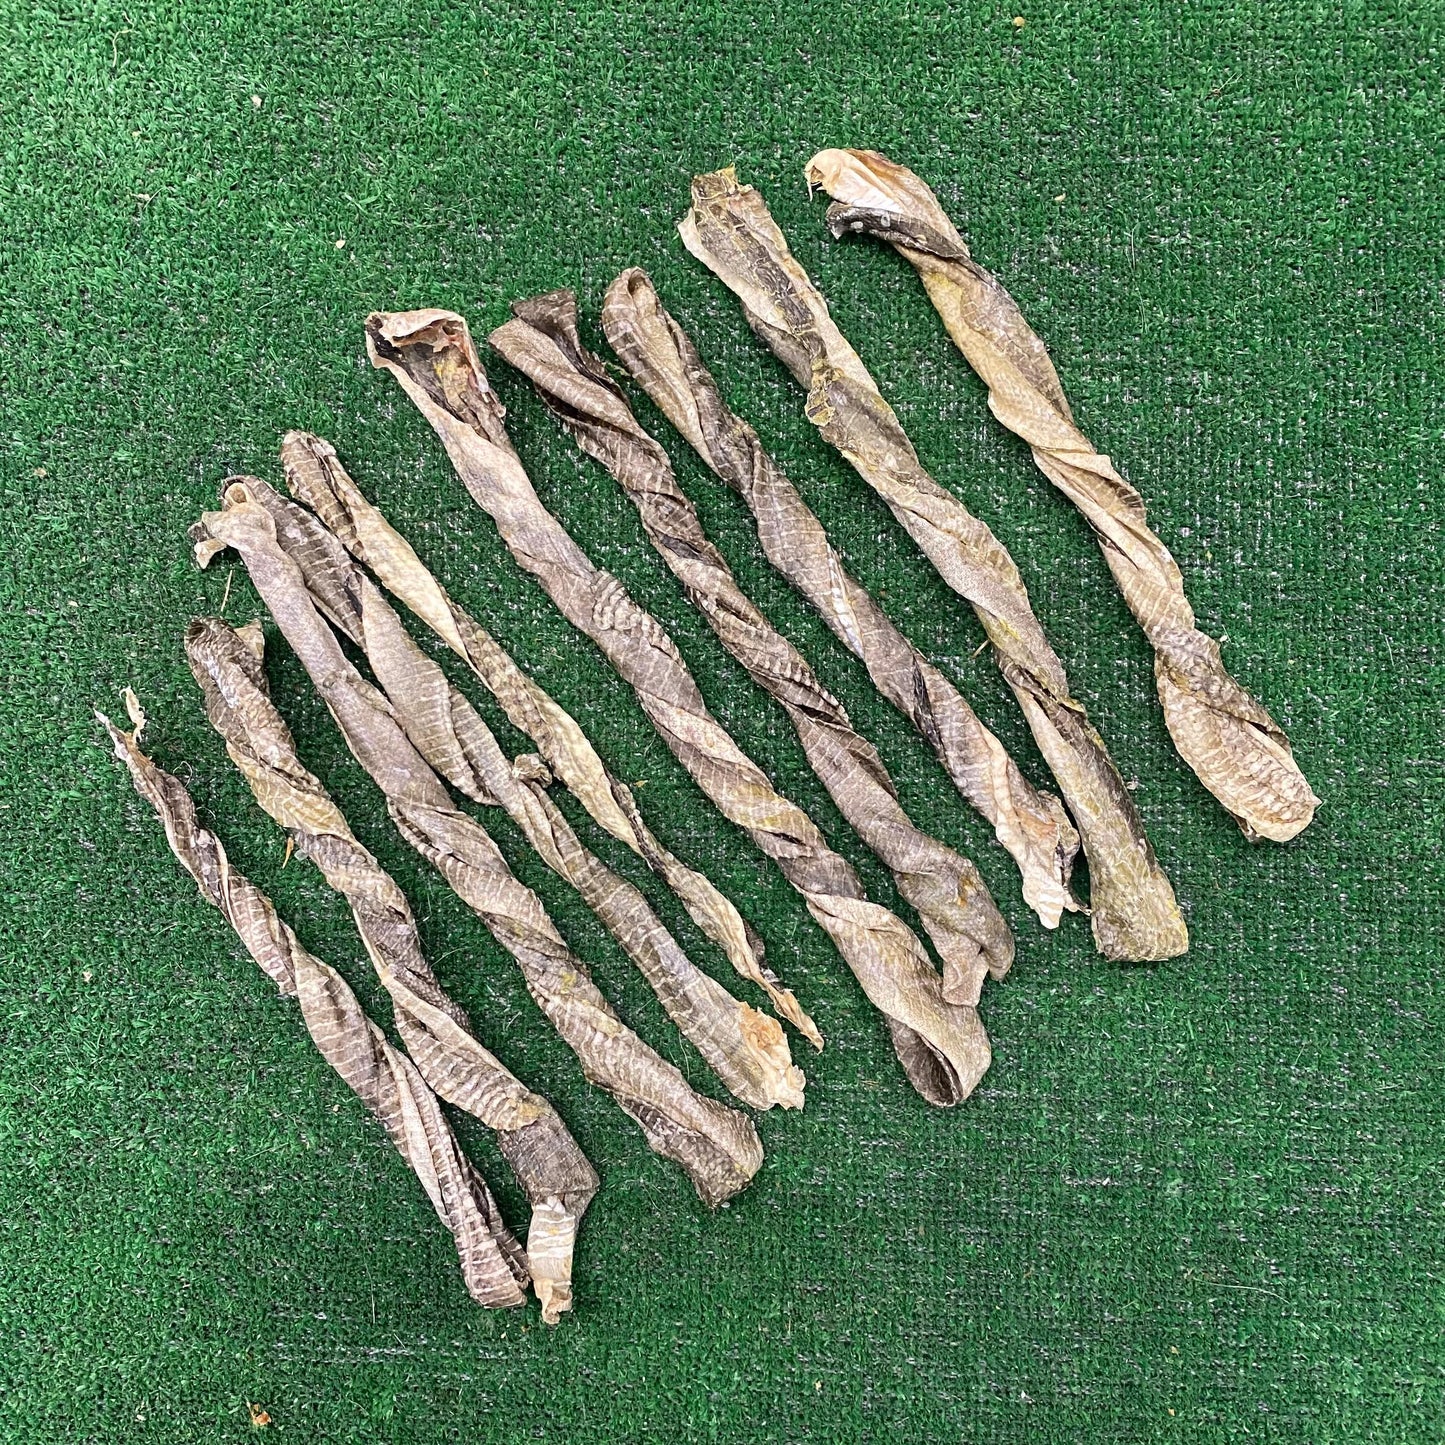 10 x Twisted Fish Skins - 100% natural, free from raw hide & any hidden nasties.